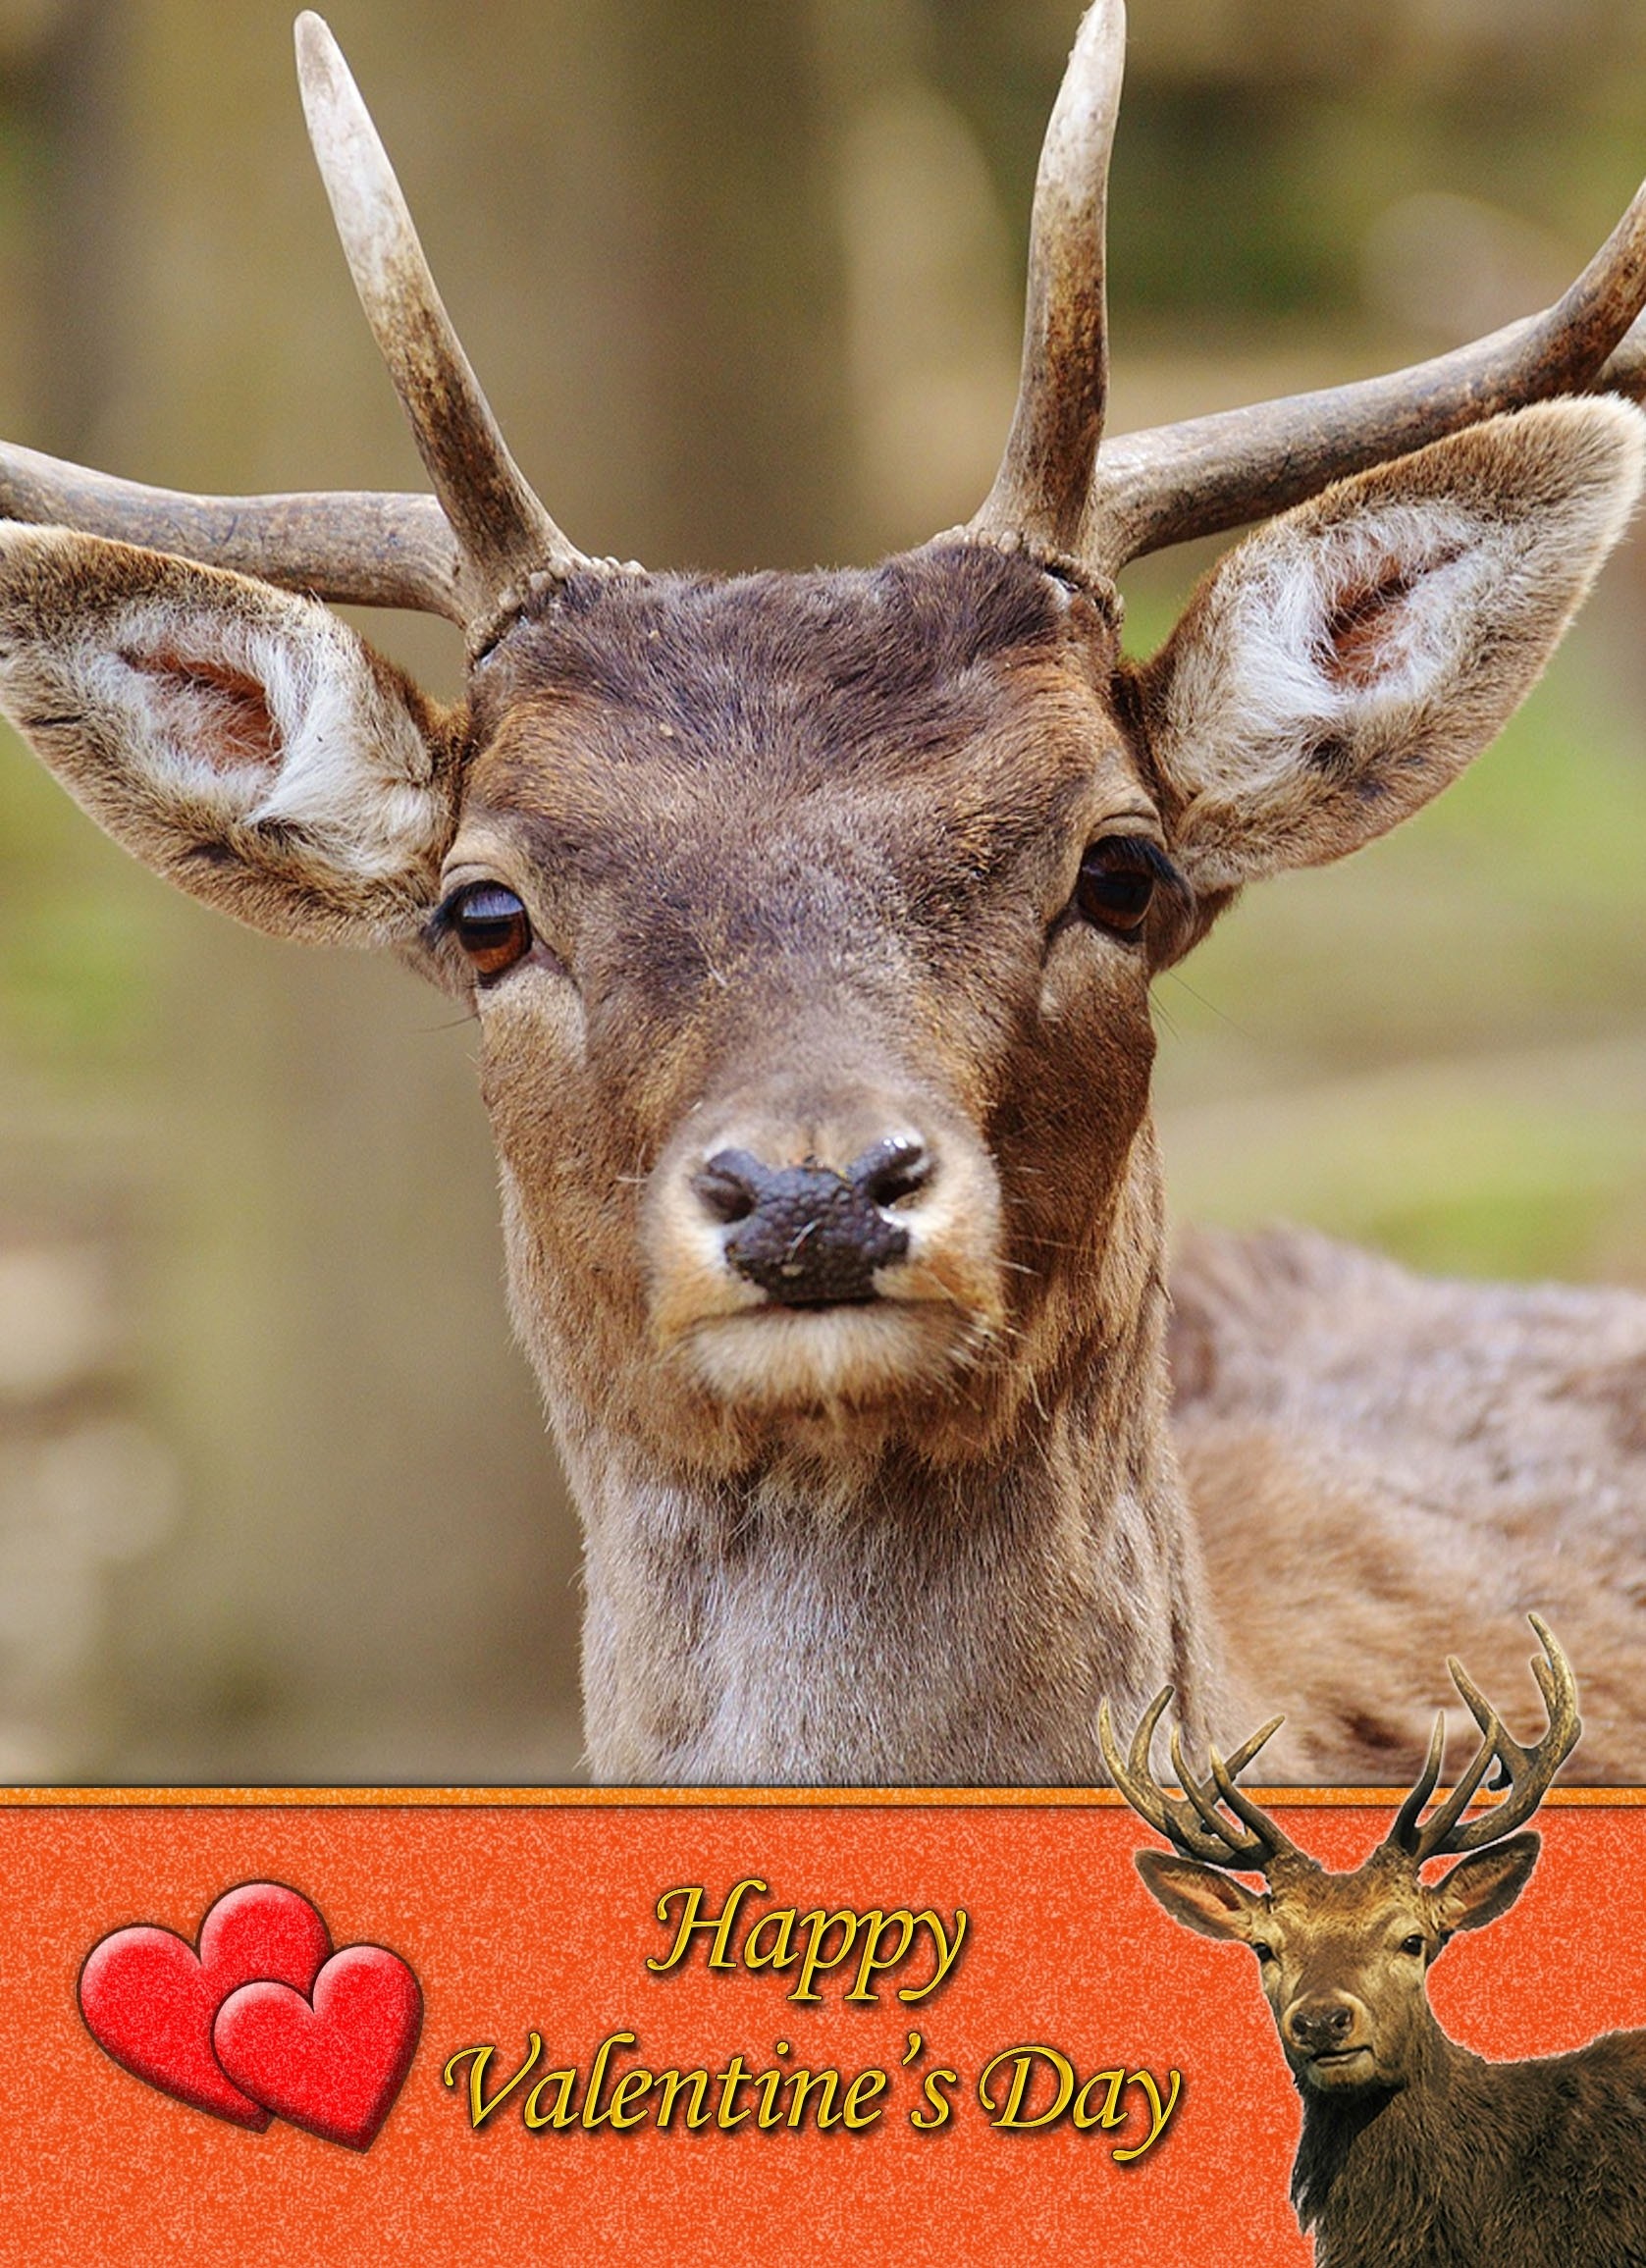 Deer/Stag Valentine's Day Card